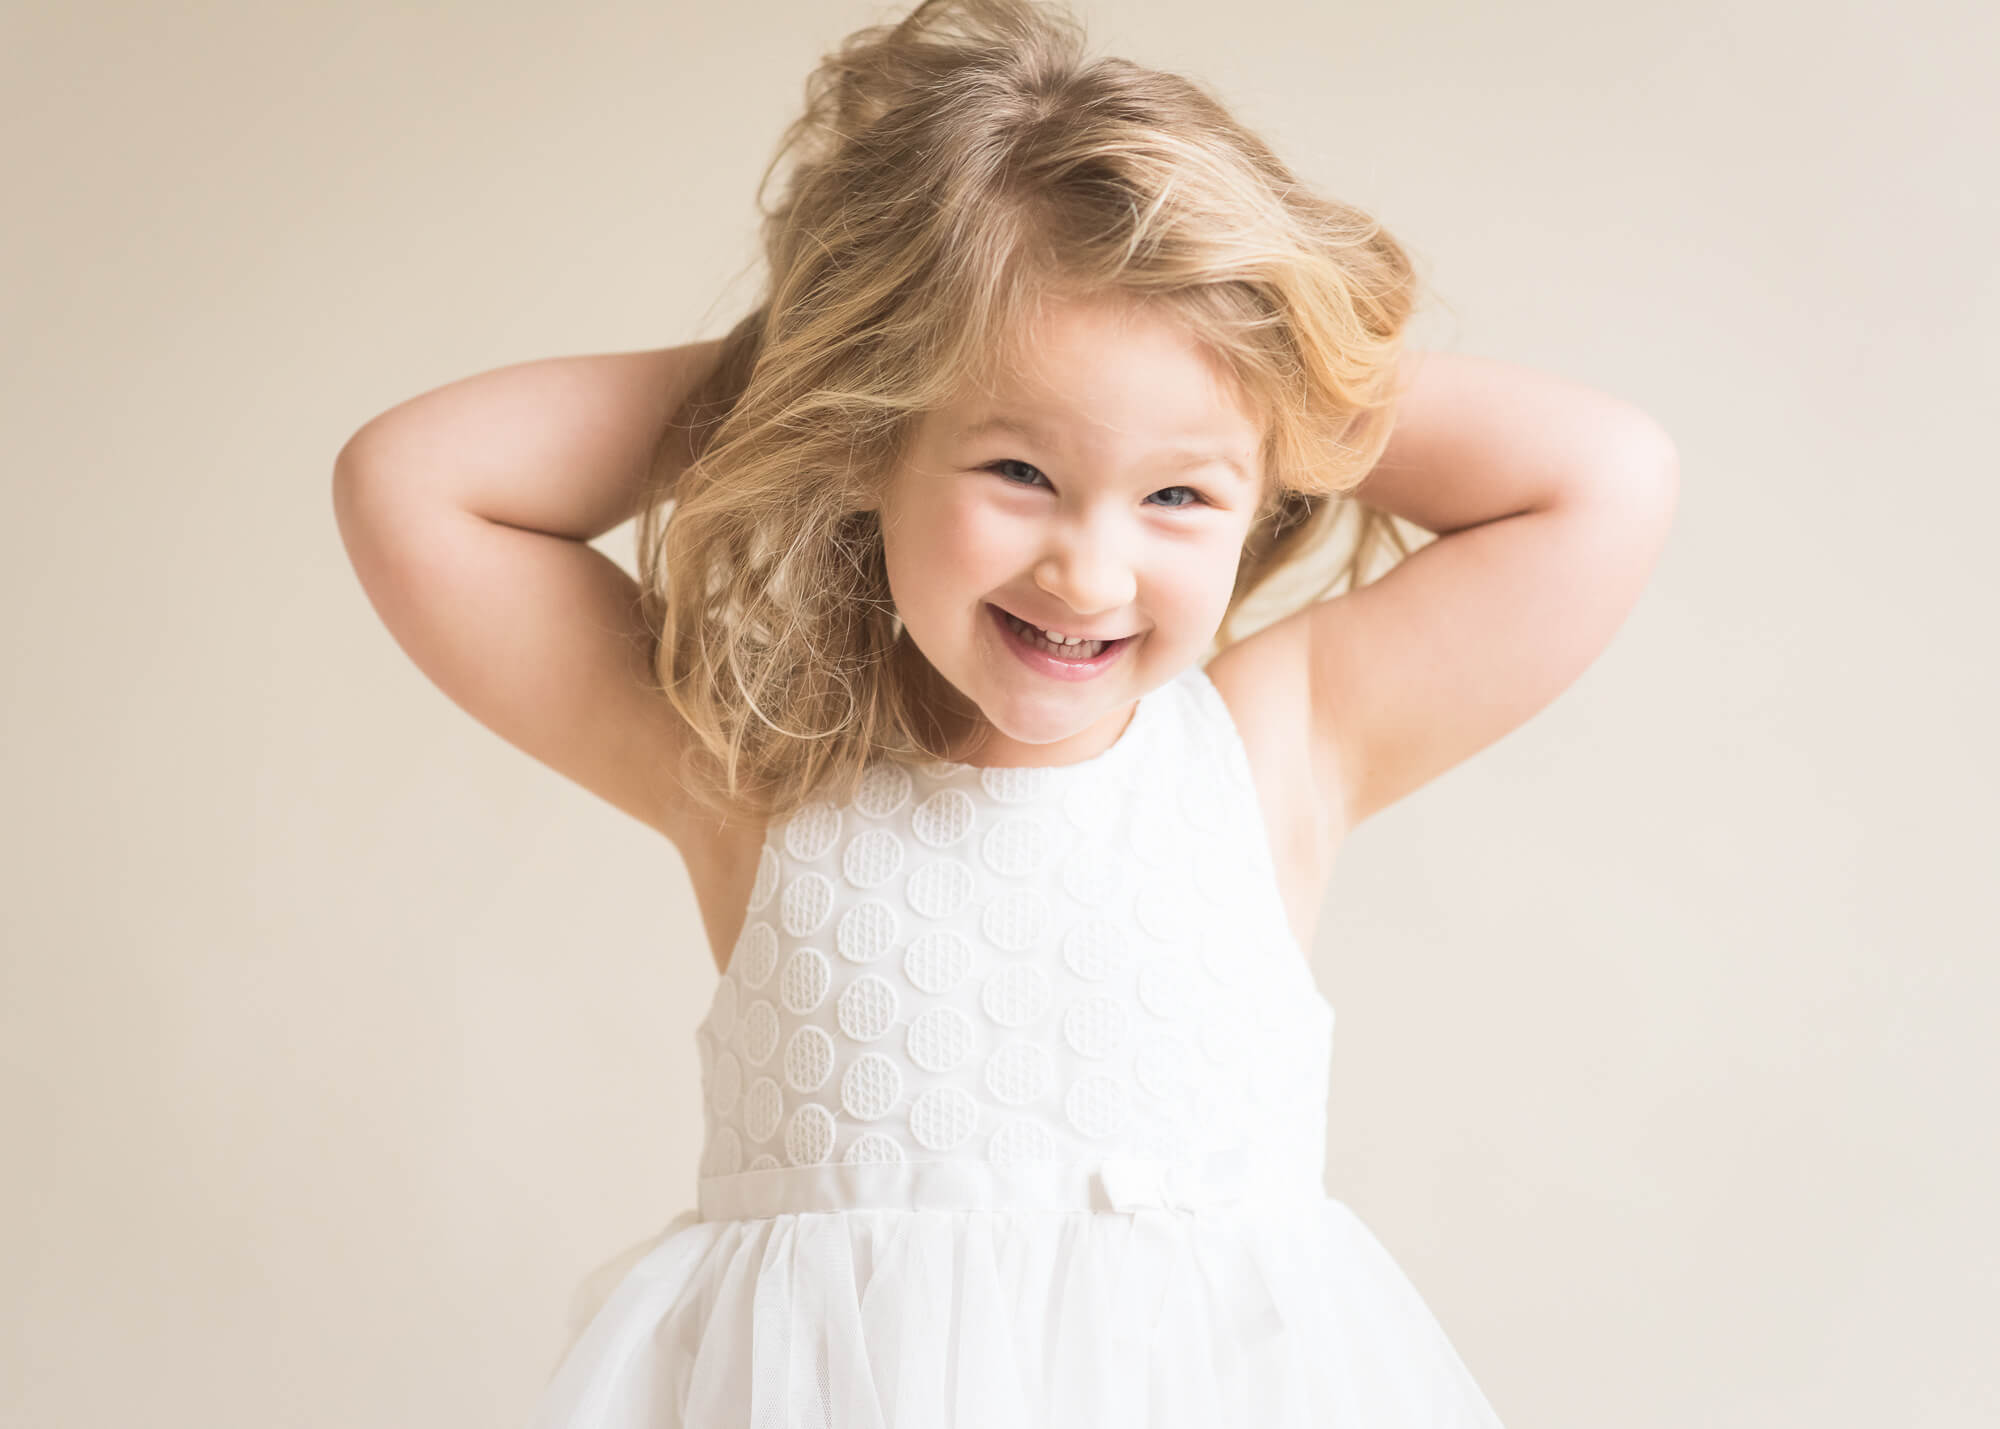 little girl full of personality in studio session